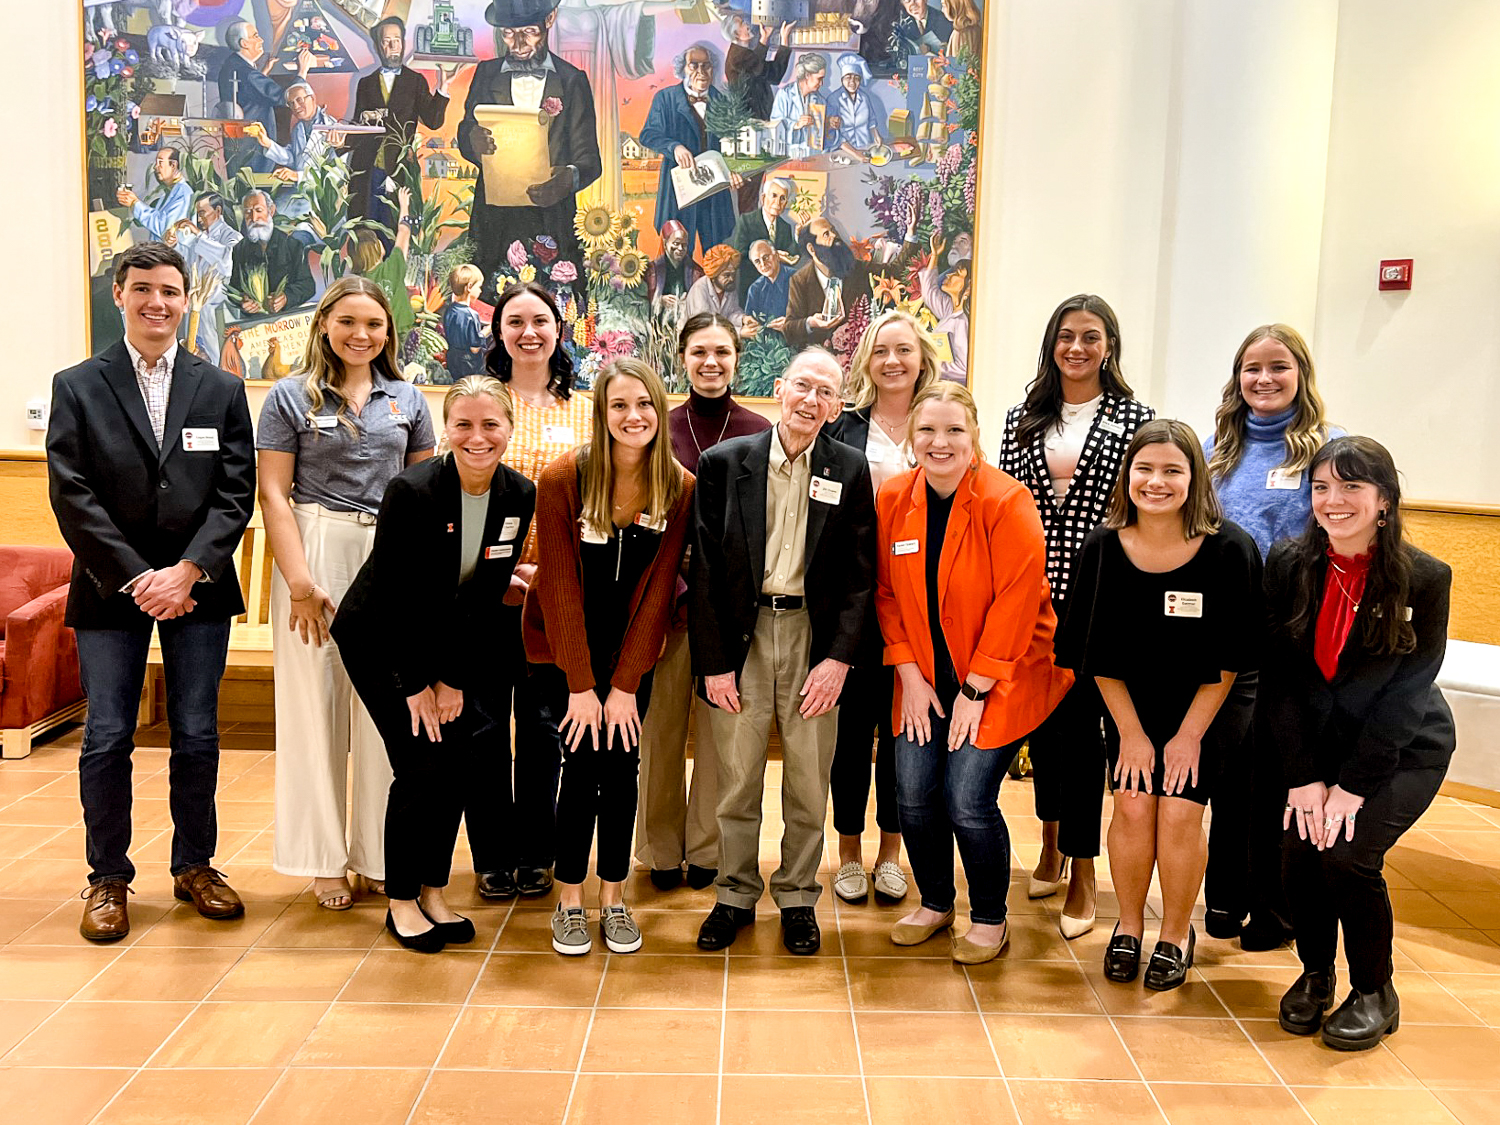 Jim Evans and a group of students pose in front of the large Abraham Lincoln painting in the ACES Funk Library.